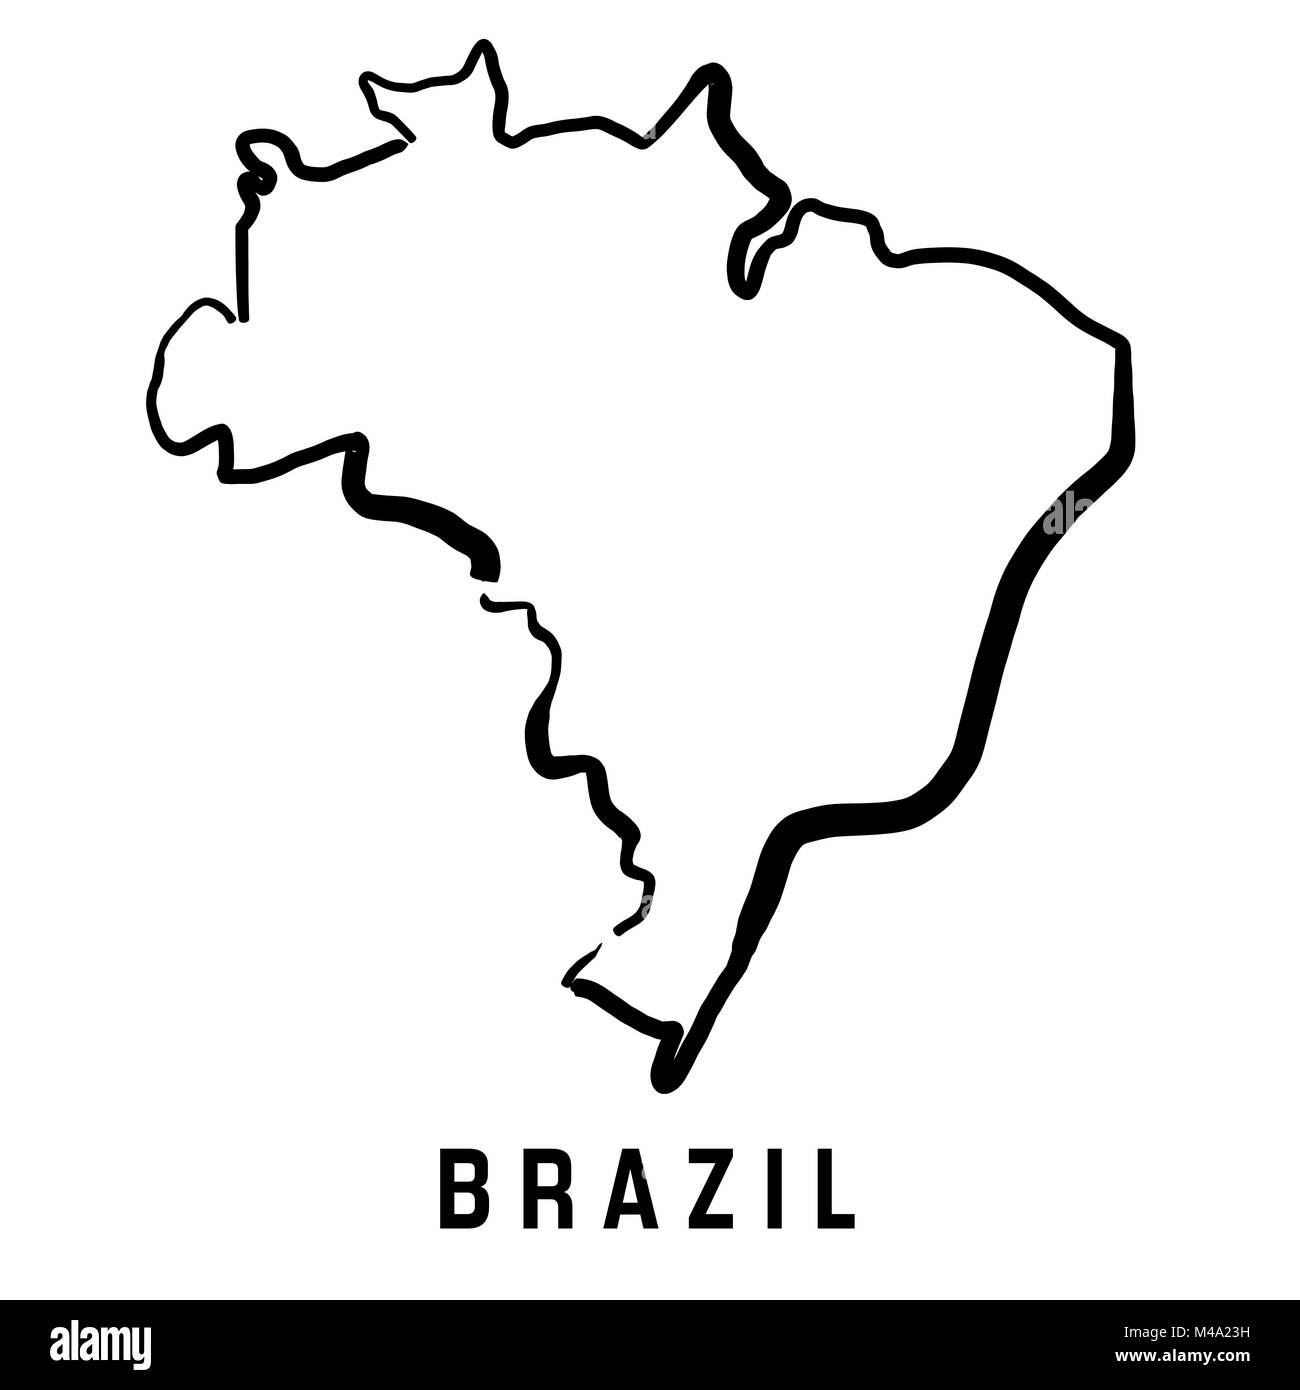 https://c8.alamy.com/comp/M4A23H/brazil-map-outline-smooth-simplified-country-shape-map-vector-M4A23H.jpg